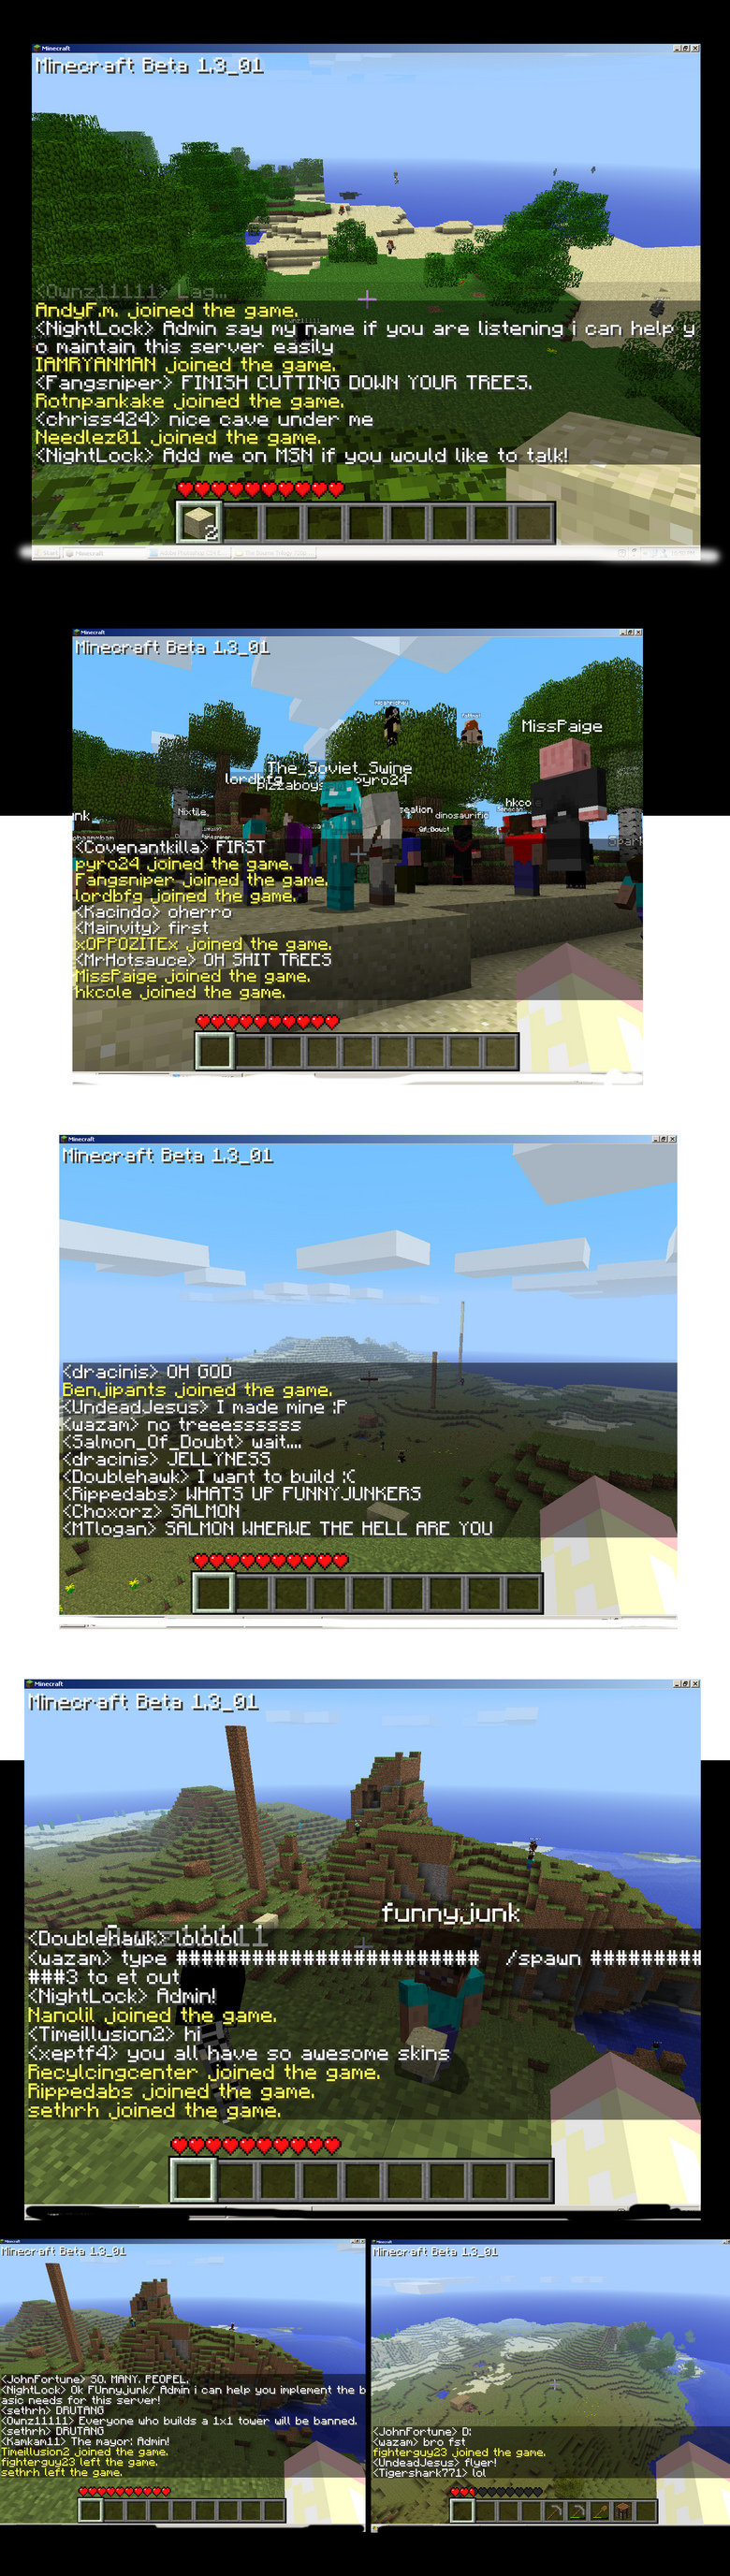 Funnyjunk Minecraft Server!. here's some shots I got from the server when it